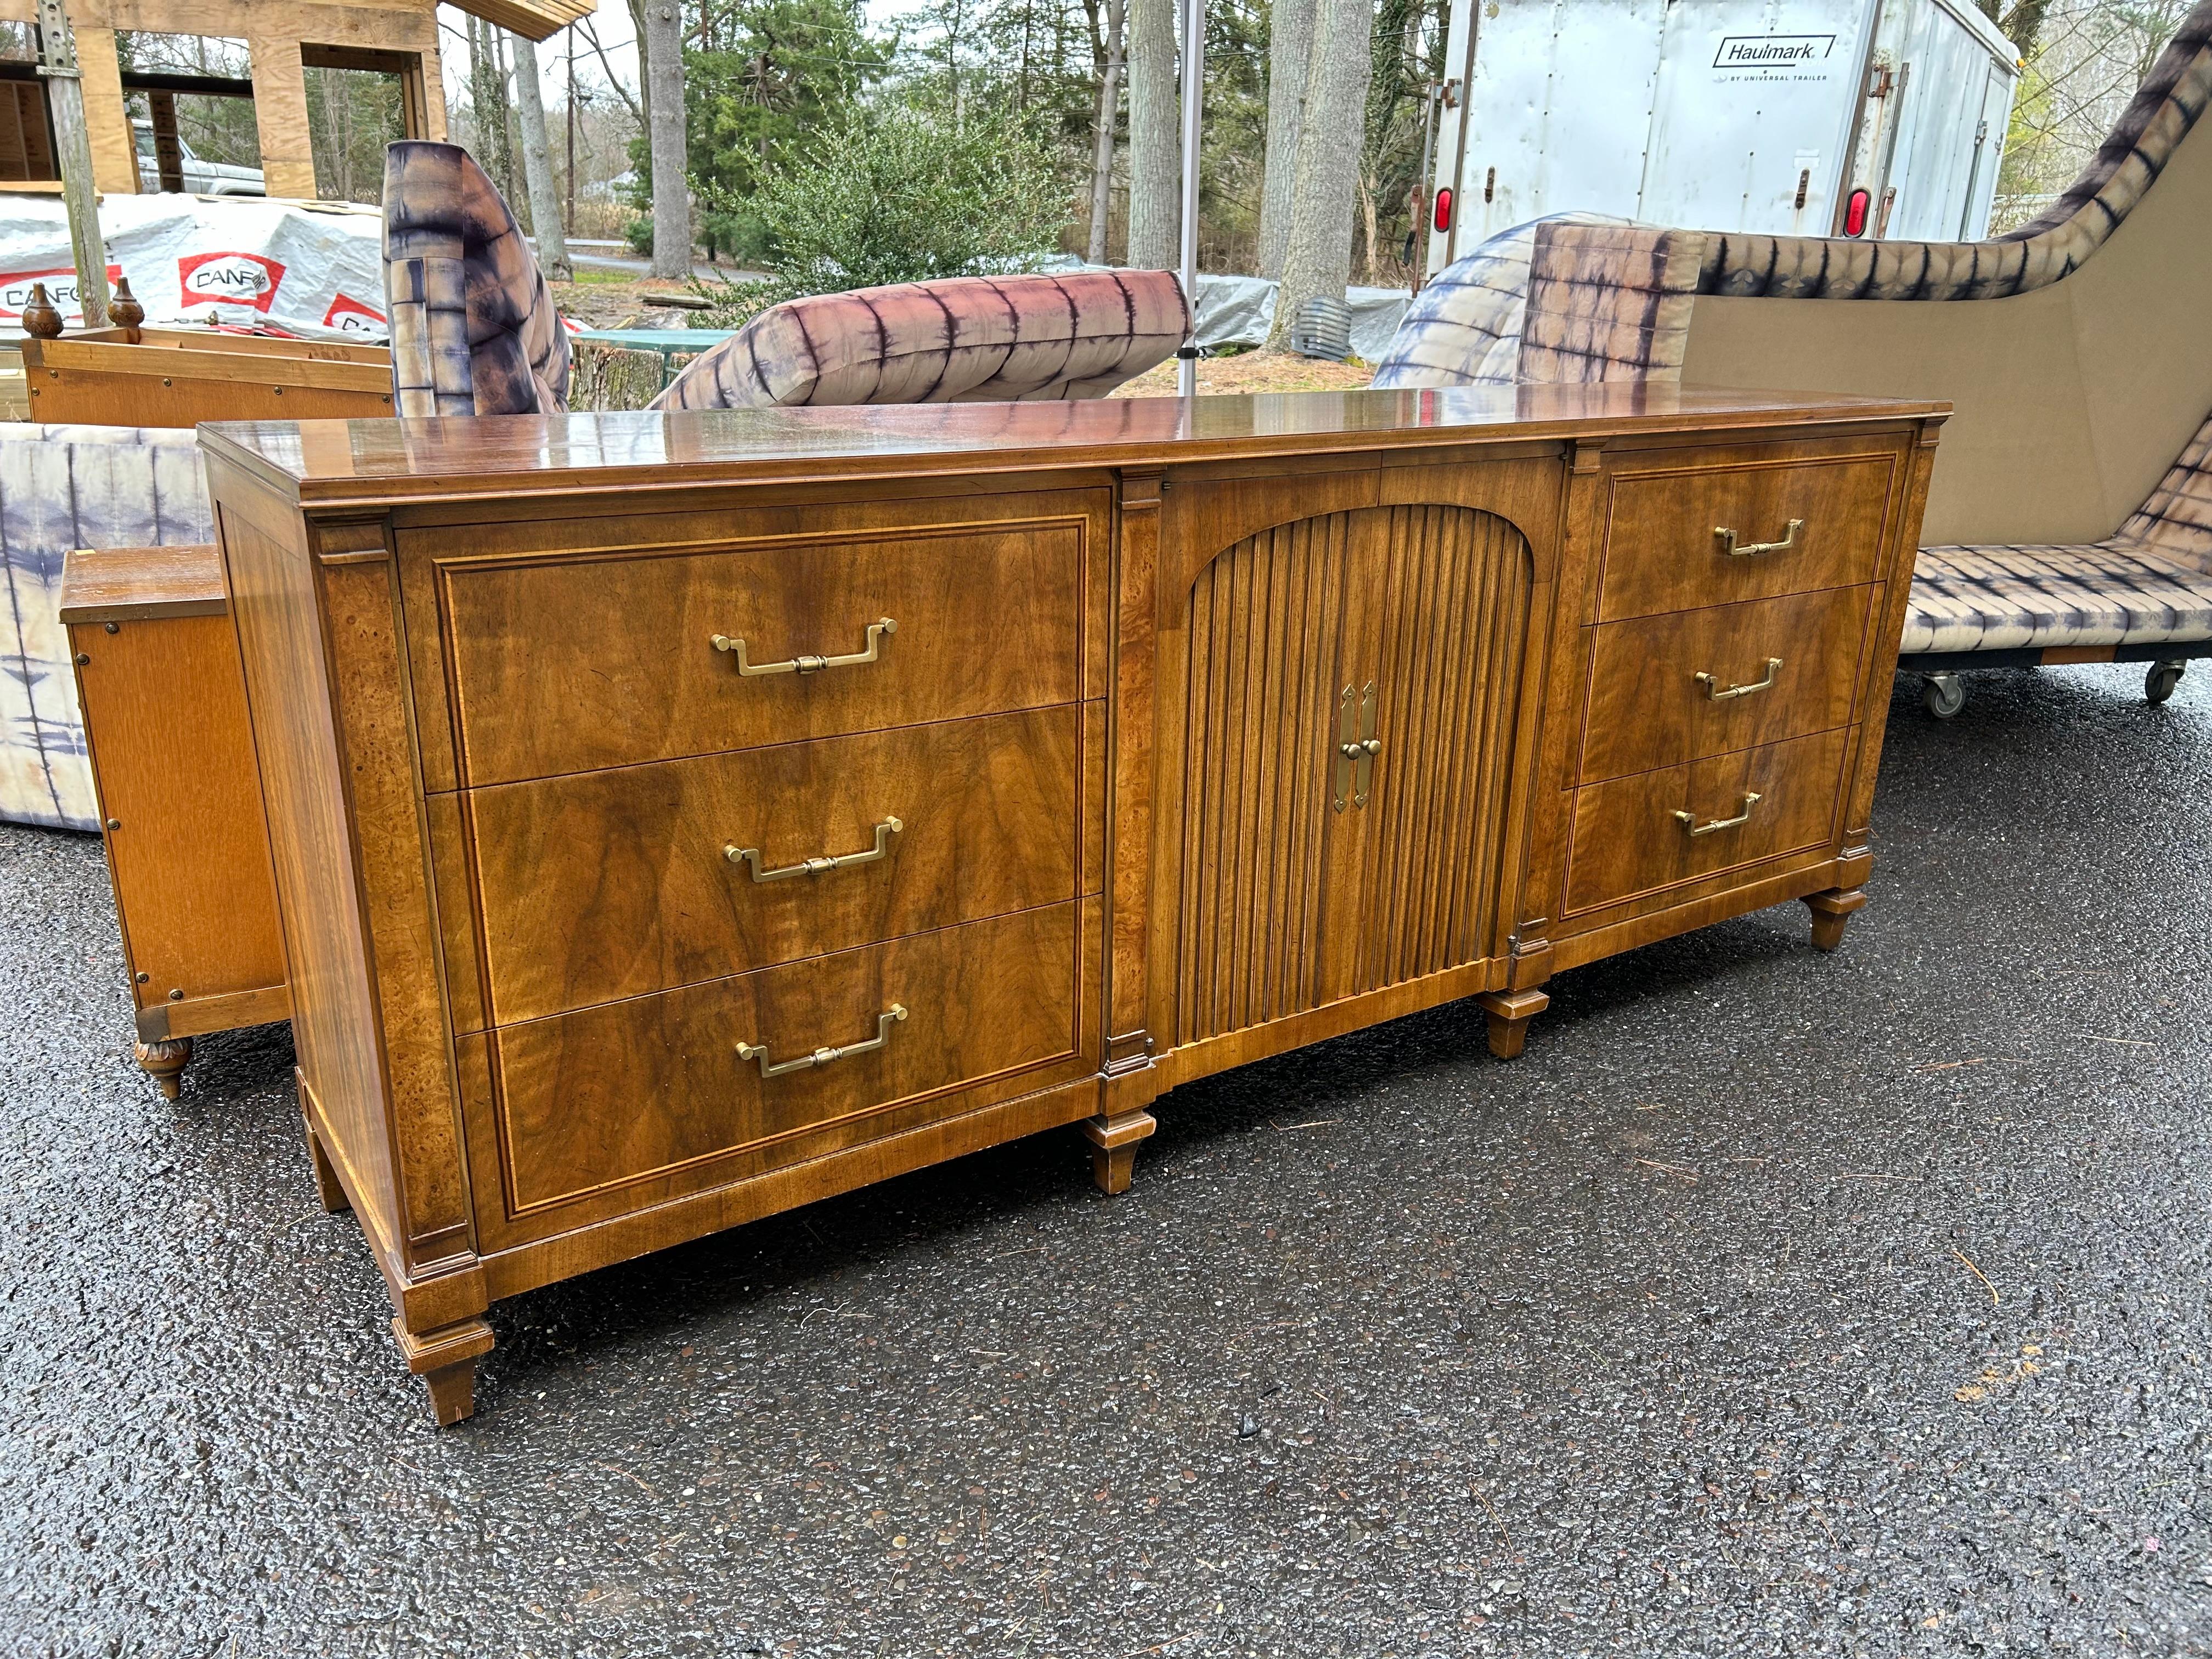 A gorgeous French Regency Louis XVI style credenza by John Widdicomb, circa 1960s.
We love the ‘Mob Wife’ Aesthetic vibe this piece gives-so vintage chic.  This piece has a commanding stature and measures 33